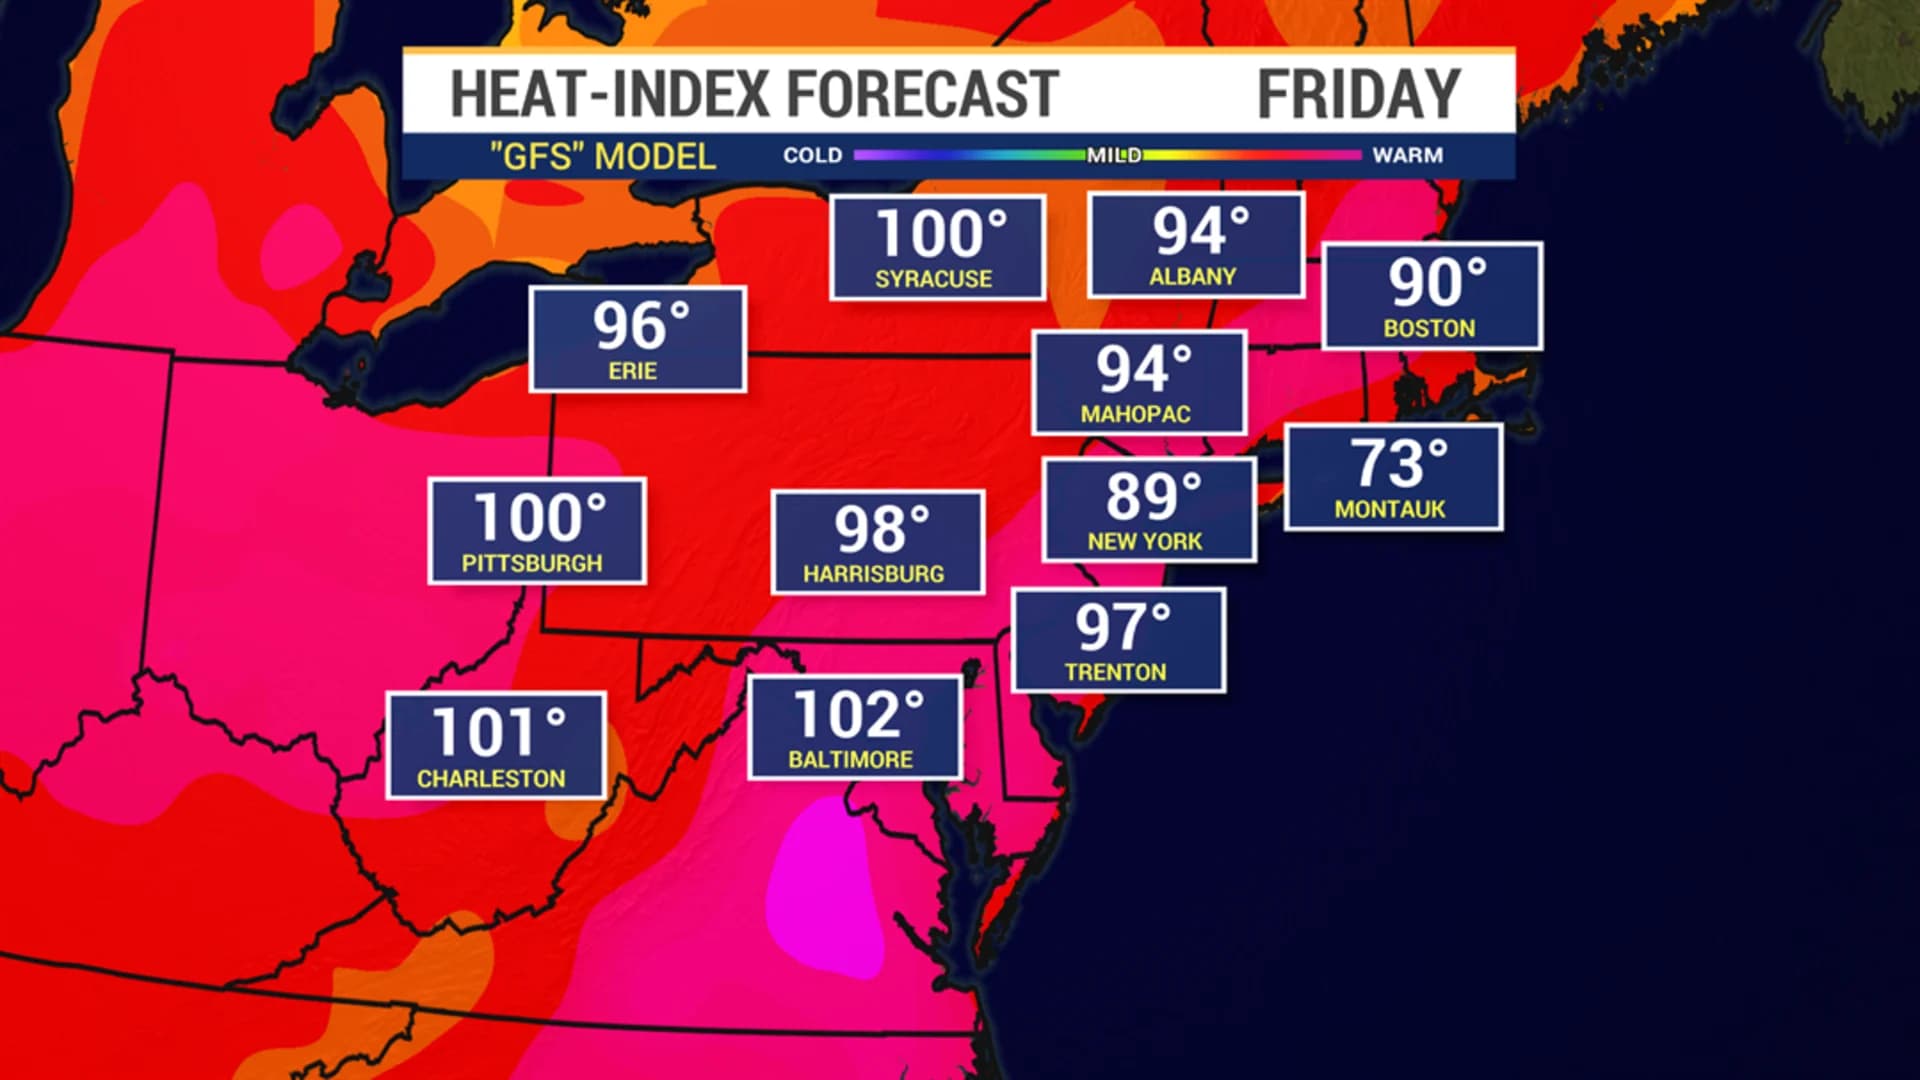 Excessive heat warning in effect Friday with temps to feel around 100-110 degrees